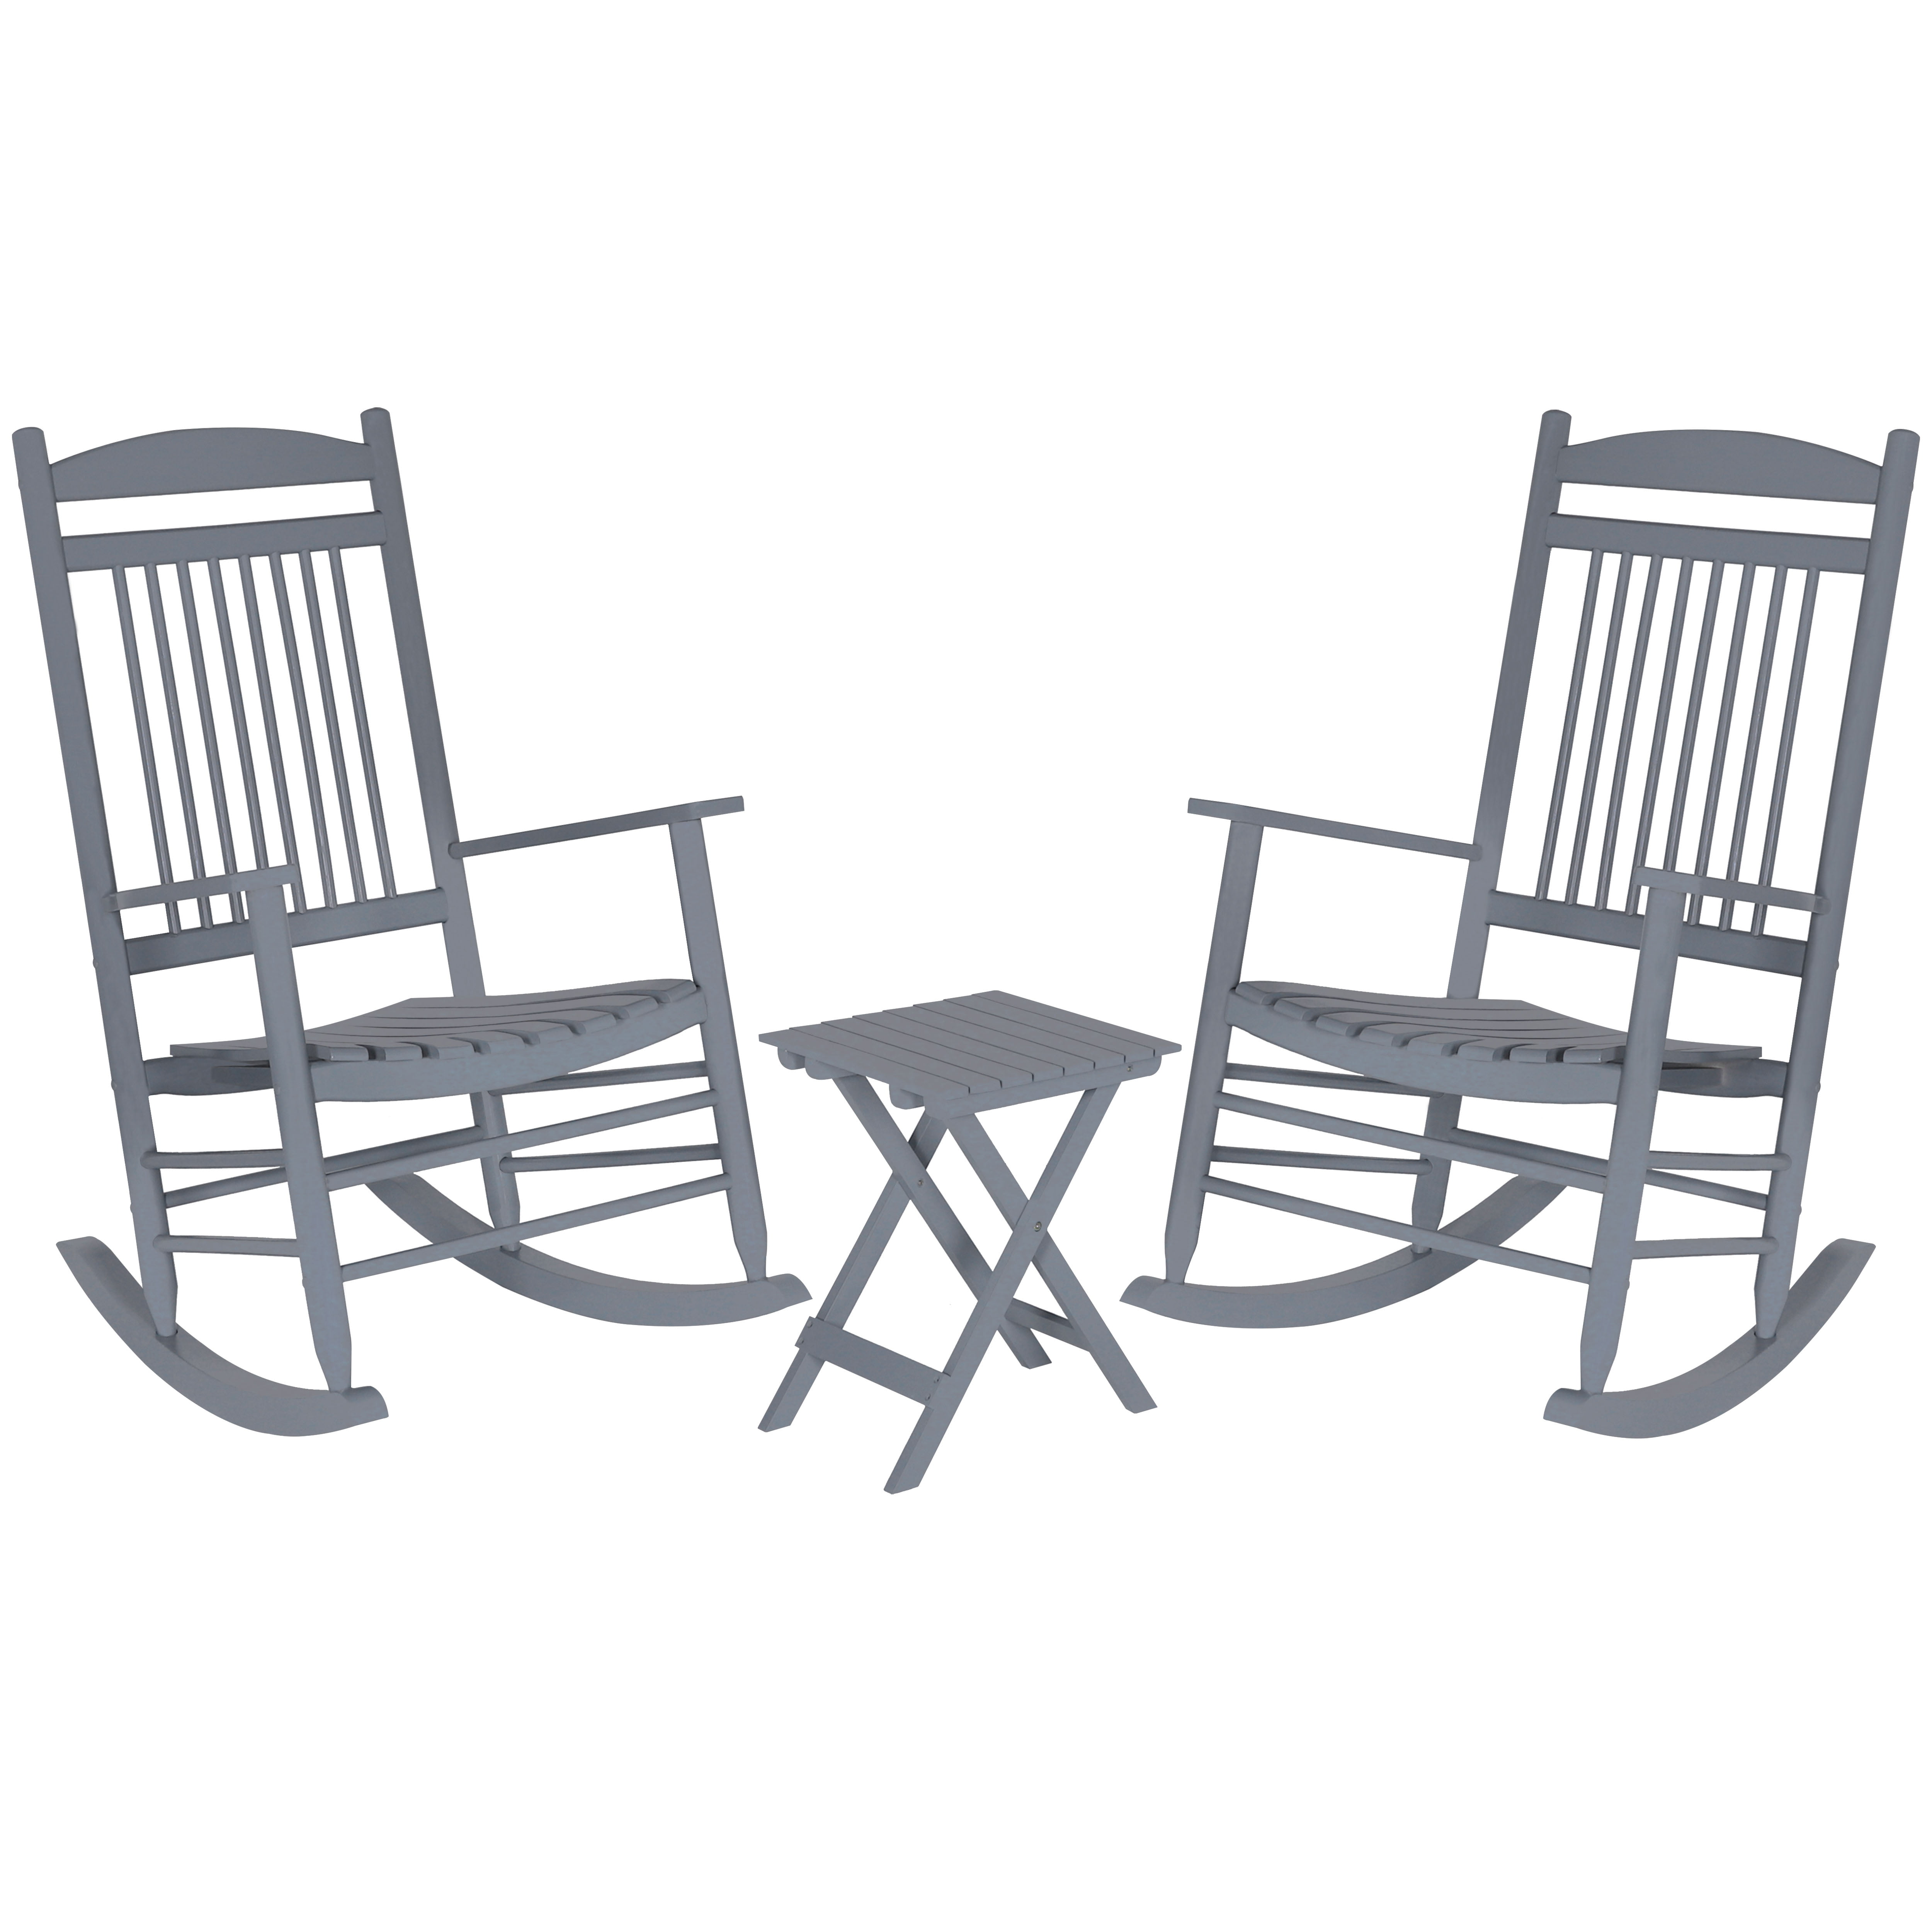 VEIKOUS 3-Piece Outdoor Wooden Bistro Rocking Chair Set for Patio with Table, Grey